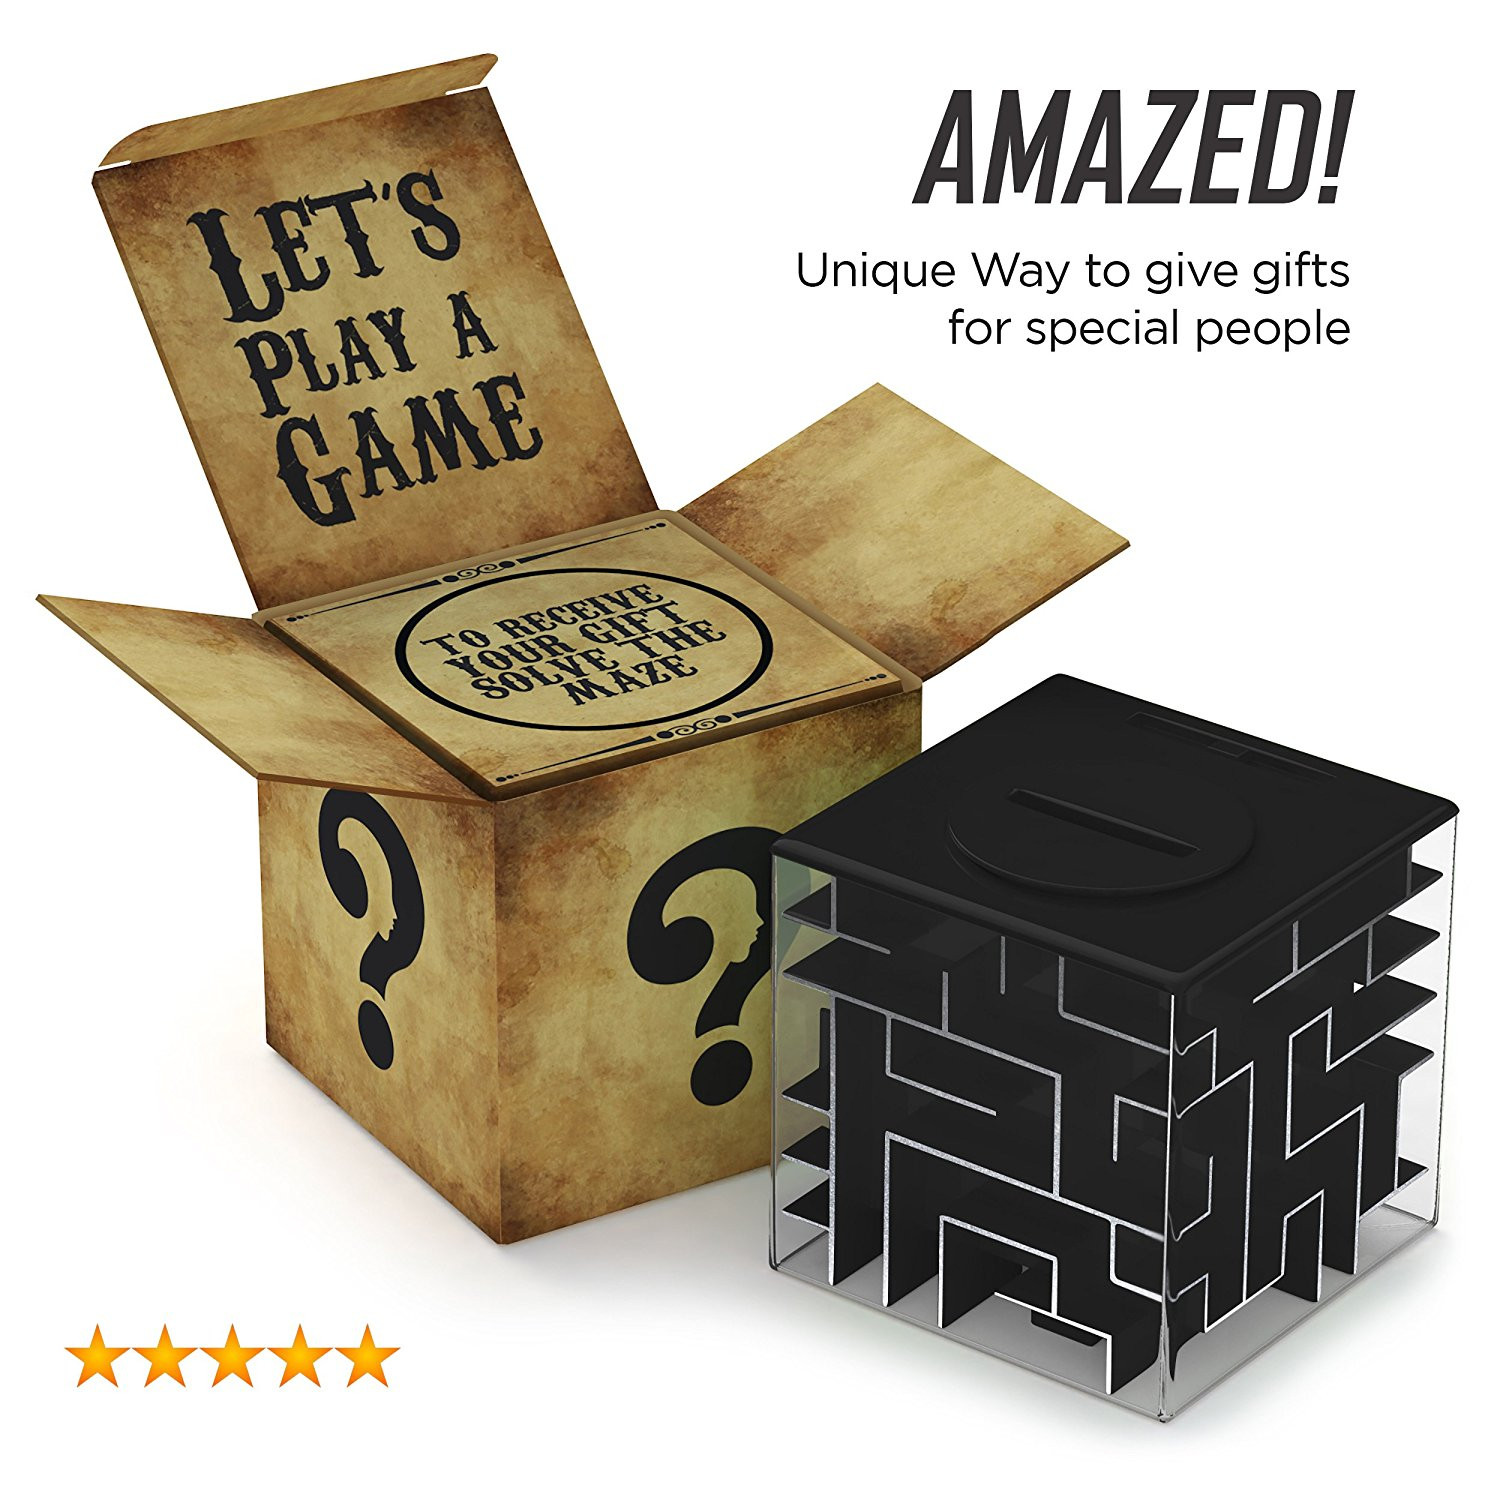 5 Dollar Gifts For Kids
 Money Maze Unique Way to Give Small Gifts Items